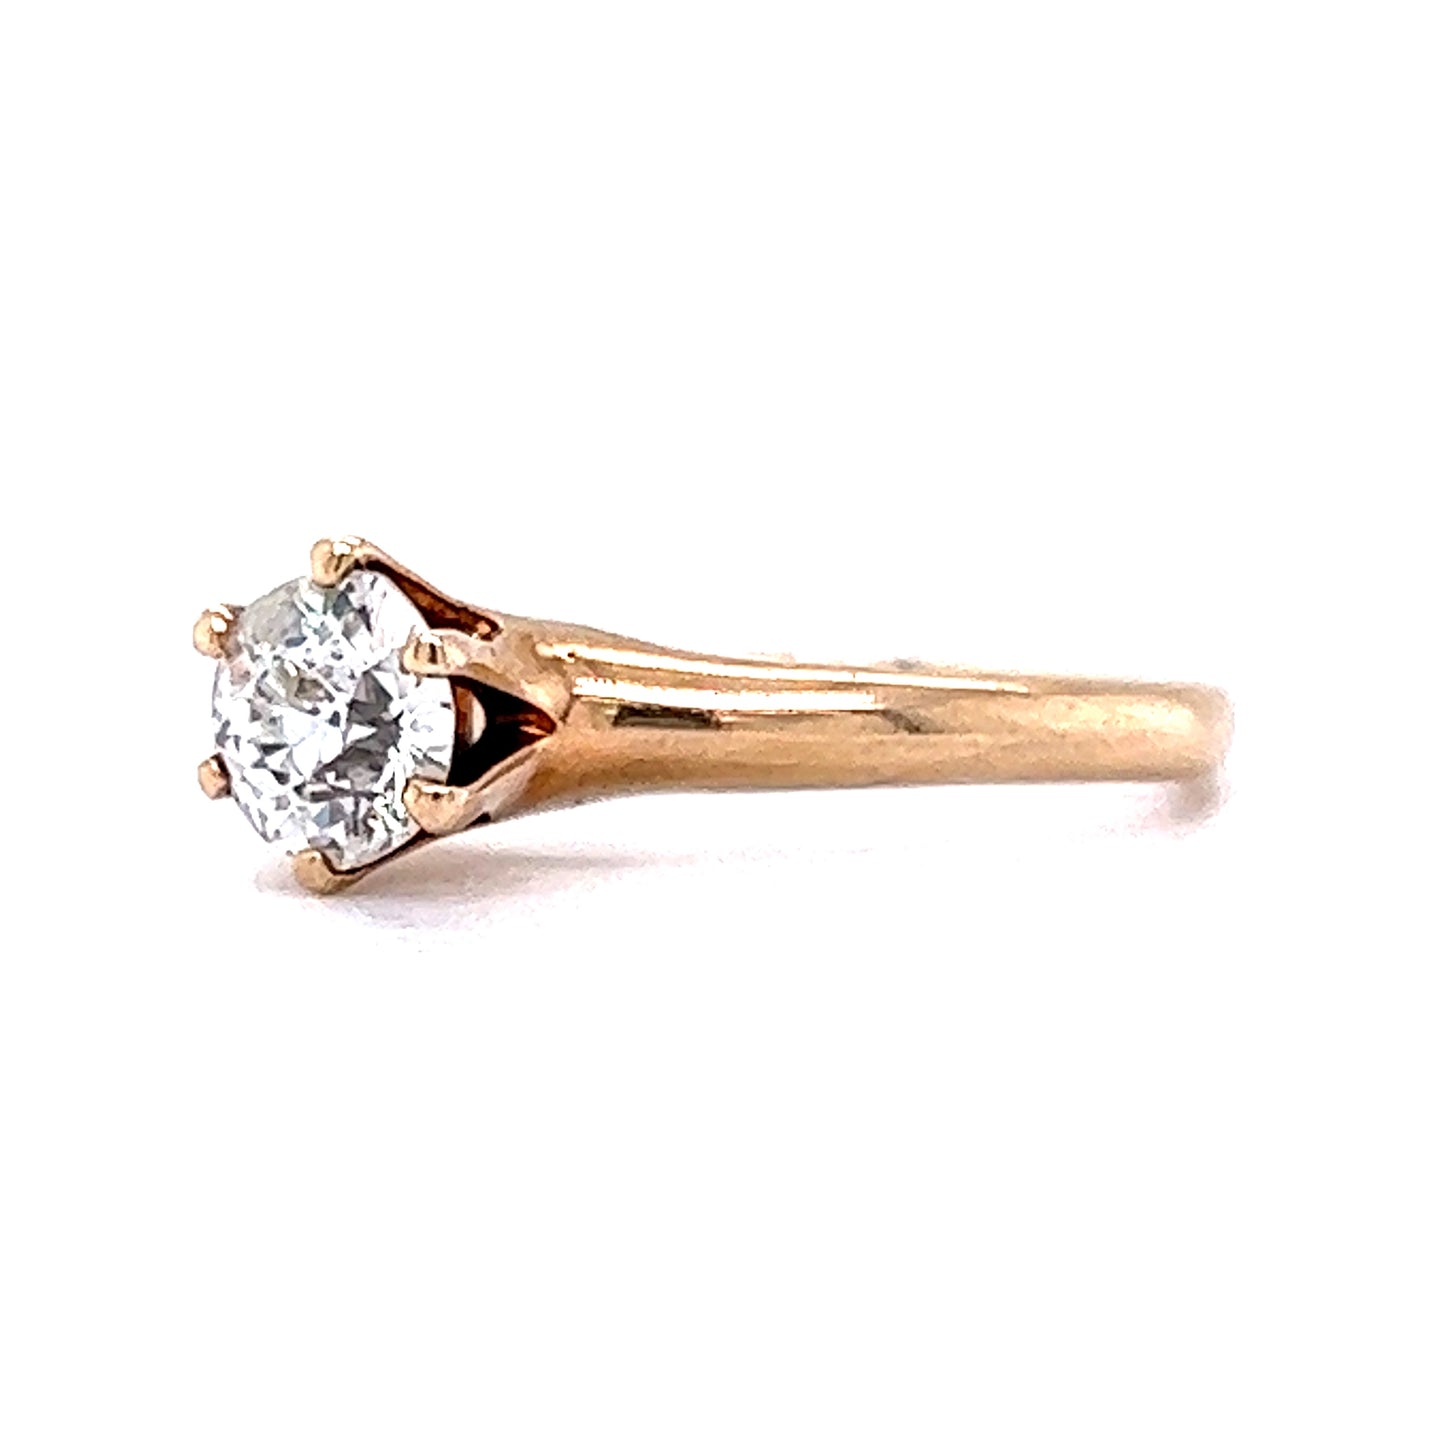 .60 Victorian Solitaire Diamond Engagement Ring in 14k Yellow Gold